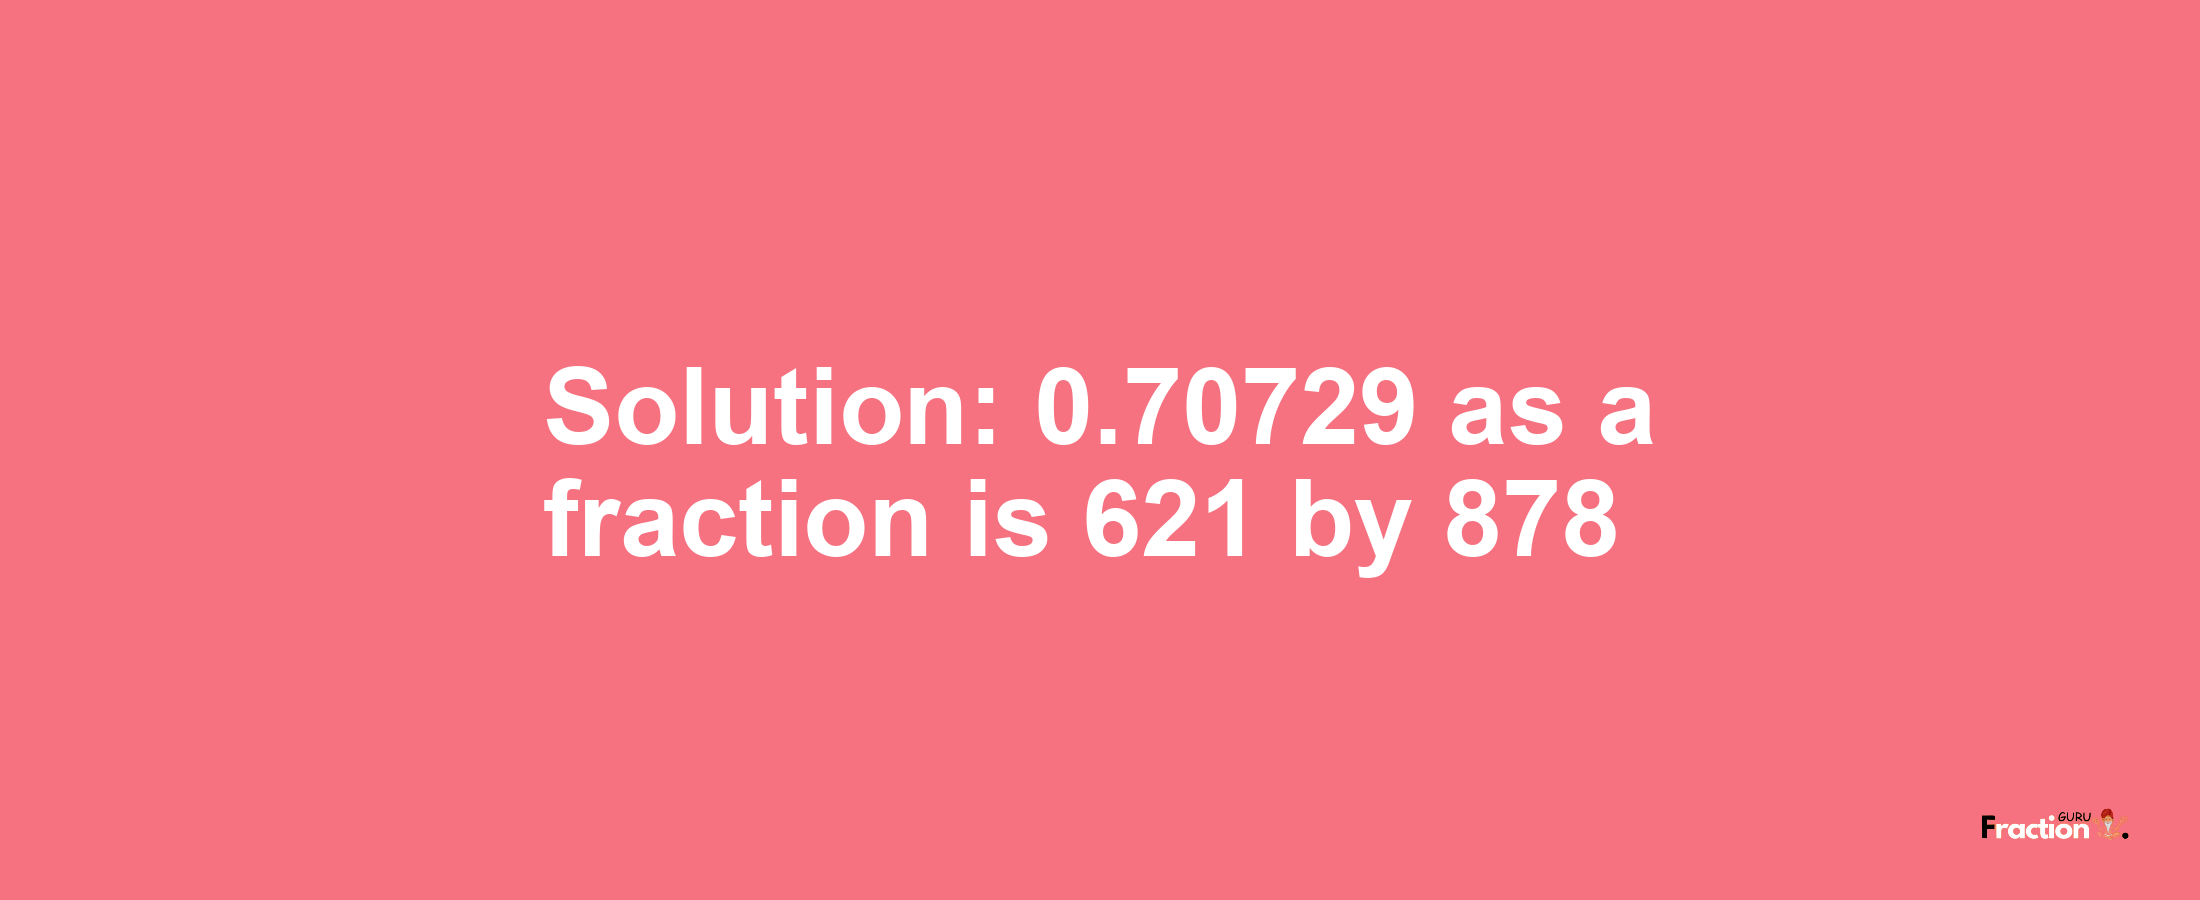 Solution:0.70729 as a fraction is 621/878